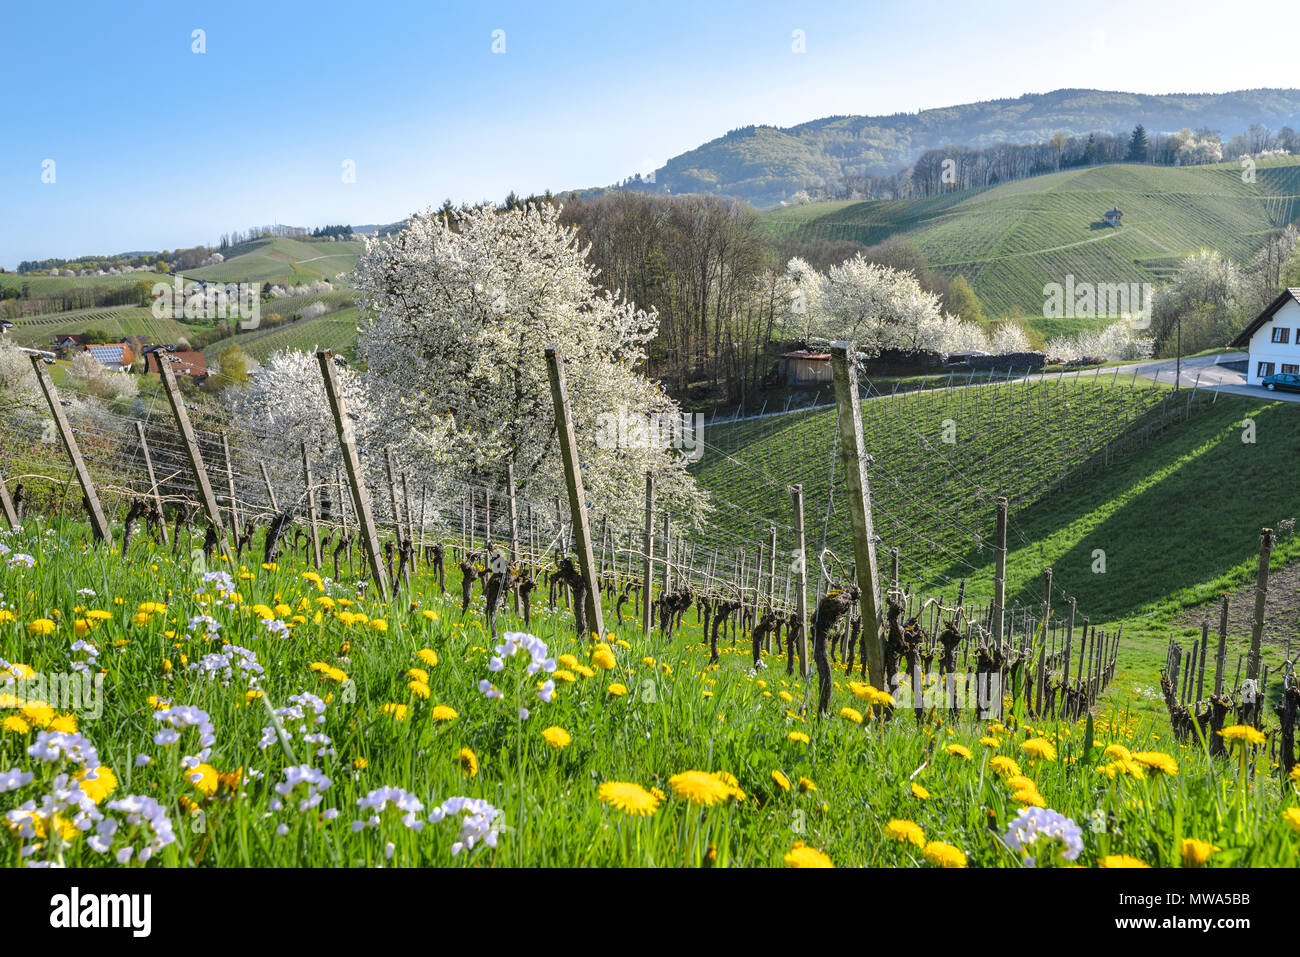 Spring in the foothills of the Black Forest, resort town, Sasbachwalden, Germany, vineyard and blooming fruit trees, Black Forest kirsch trees Stock Photo